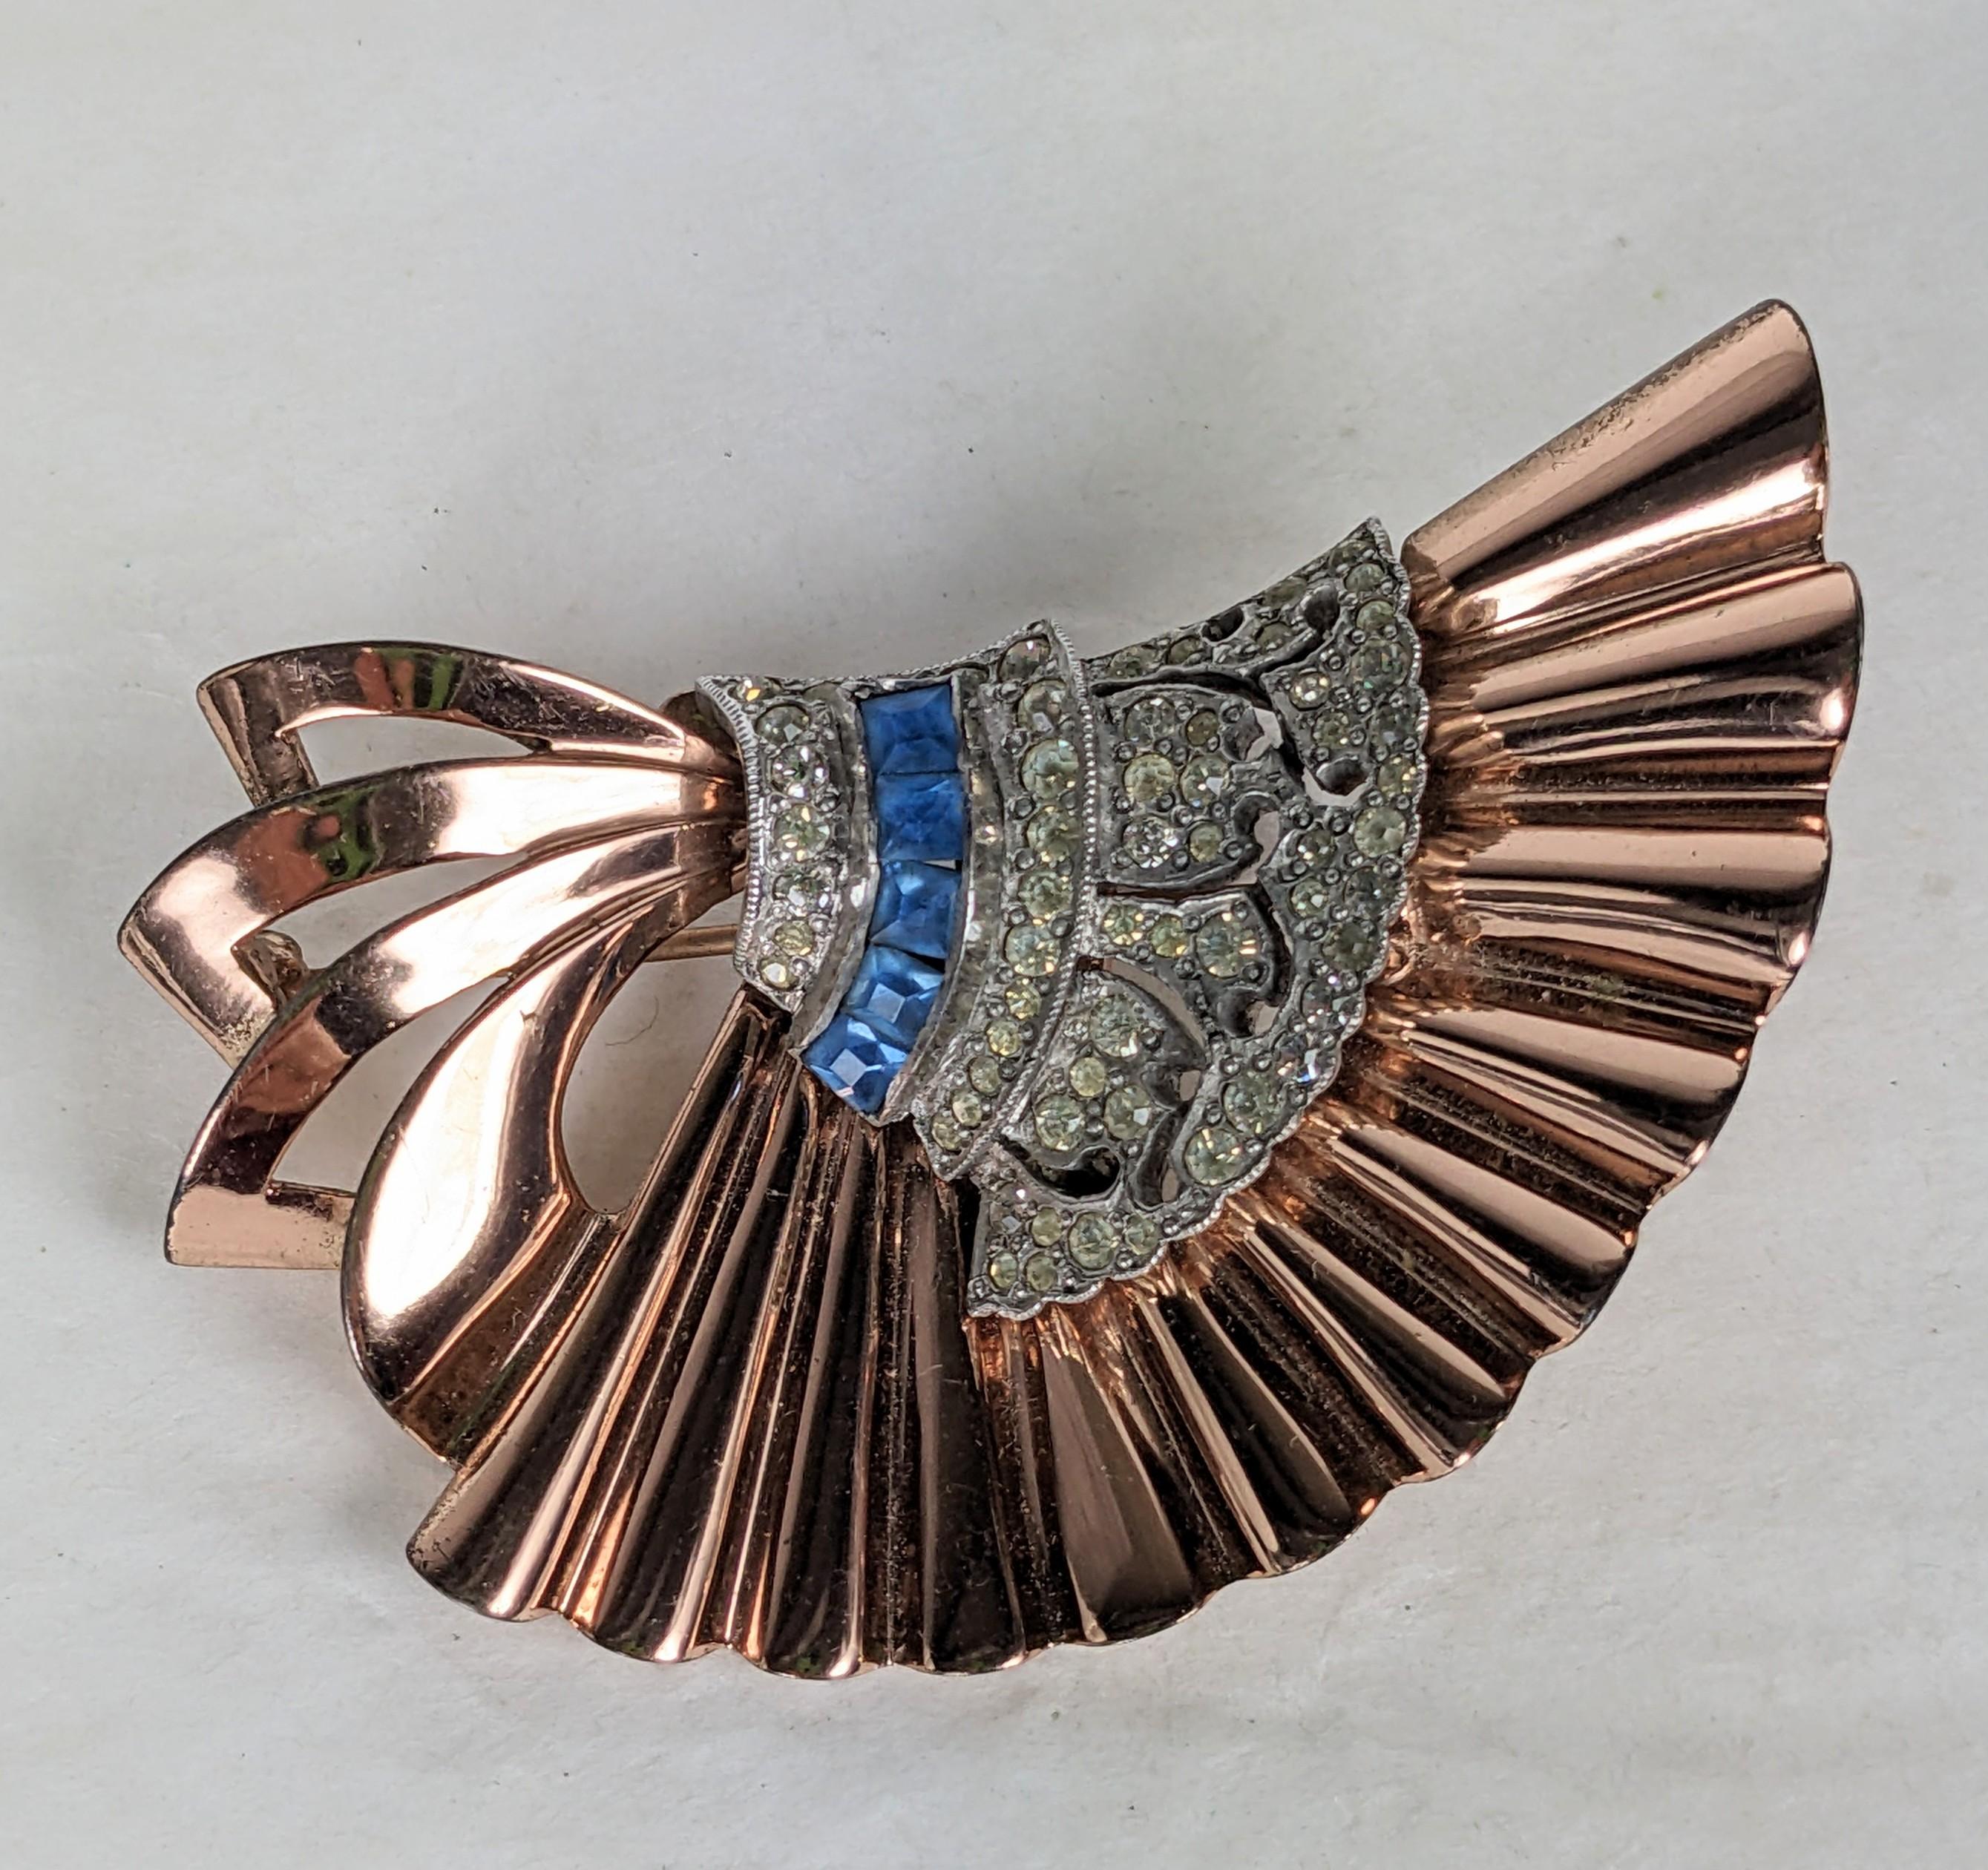 Pennino Pink Gold Vermeil Retro Fan Shaped Brooch from the 1940's in sterling. Pave accented central motif with square cut faux aquamarines. Wonderful design and condition. Signed Pennino Sterling, 1940's USA. 2.5